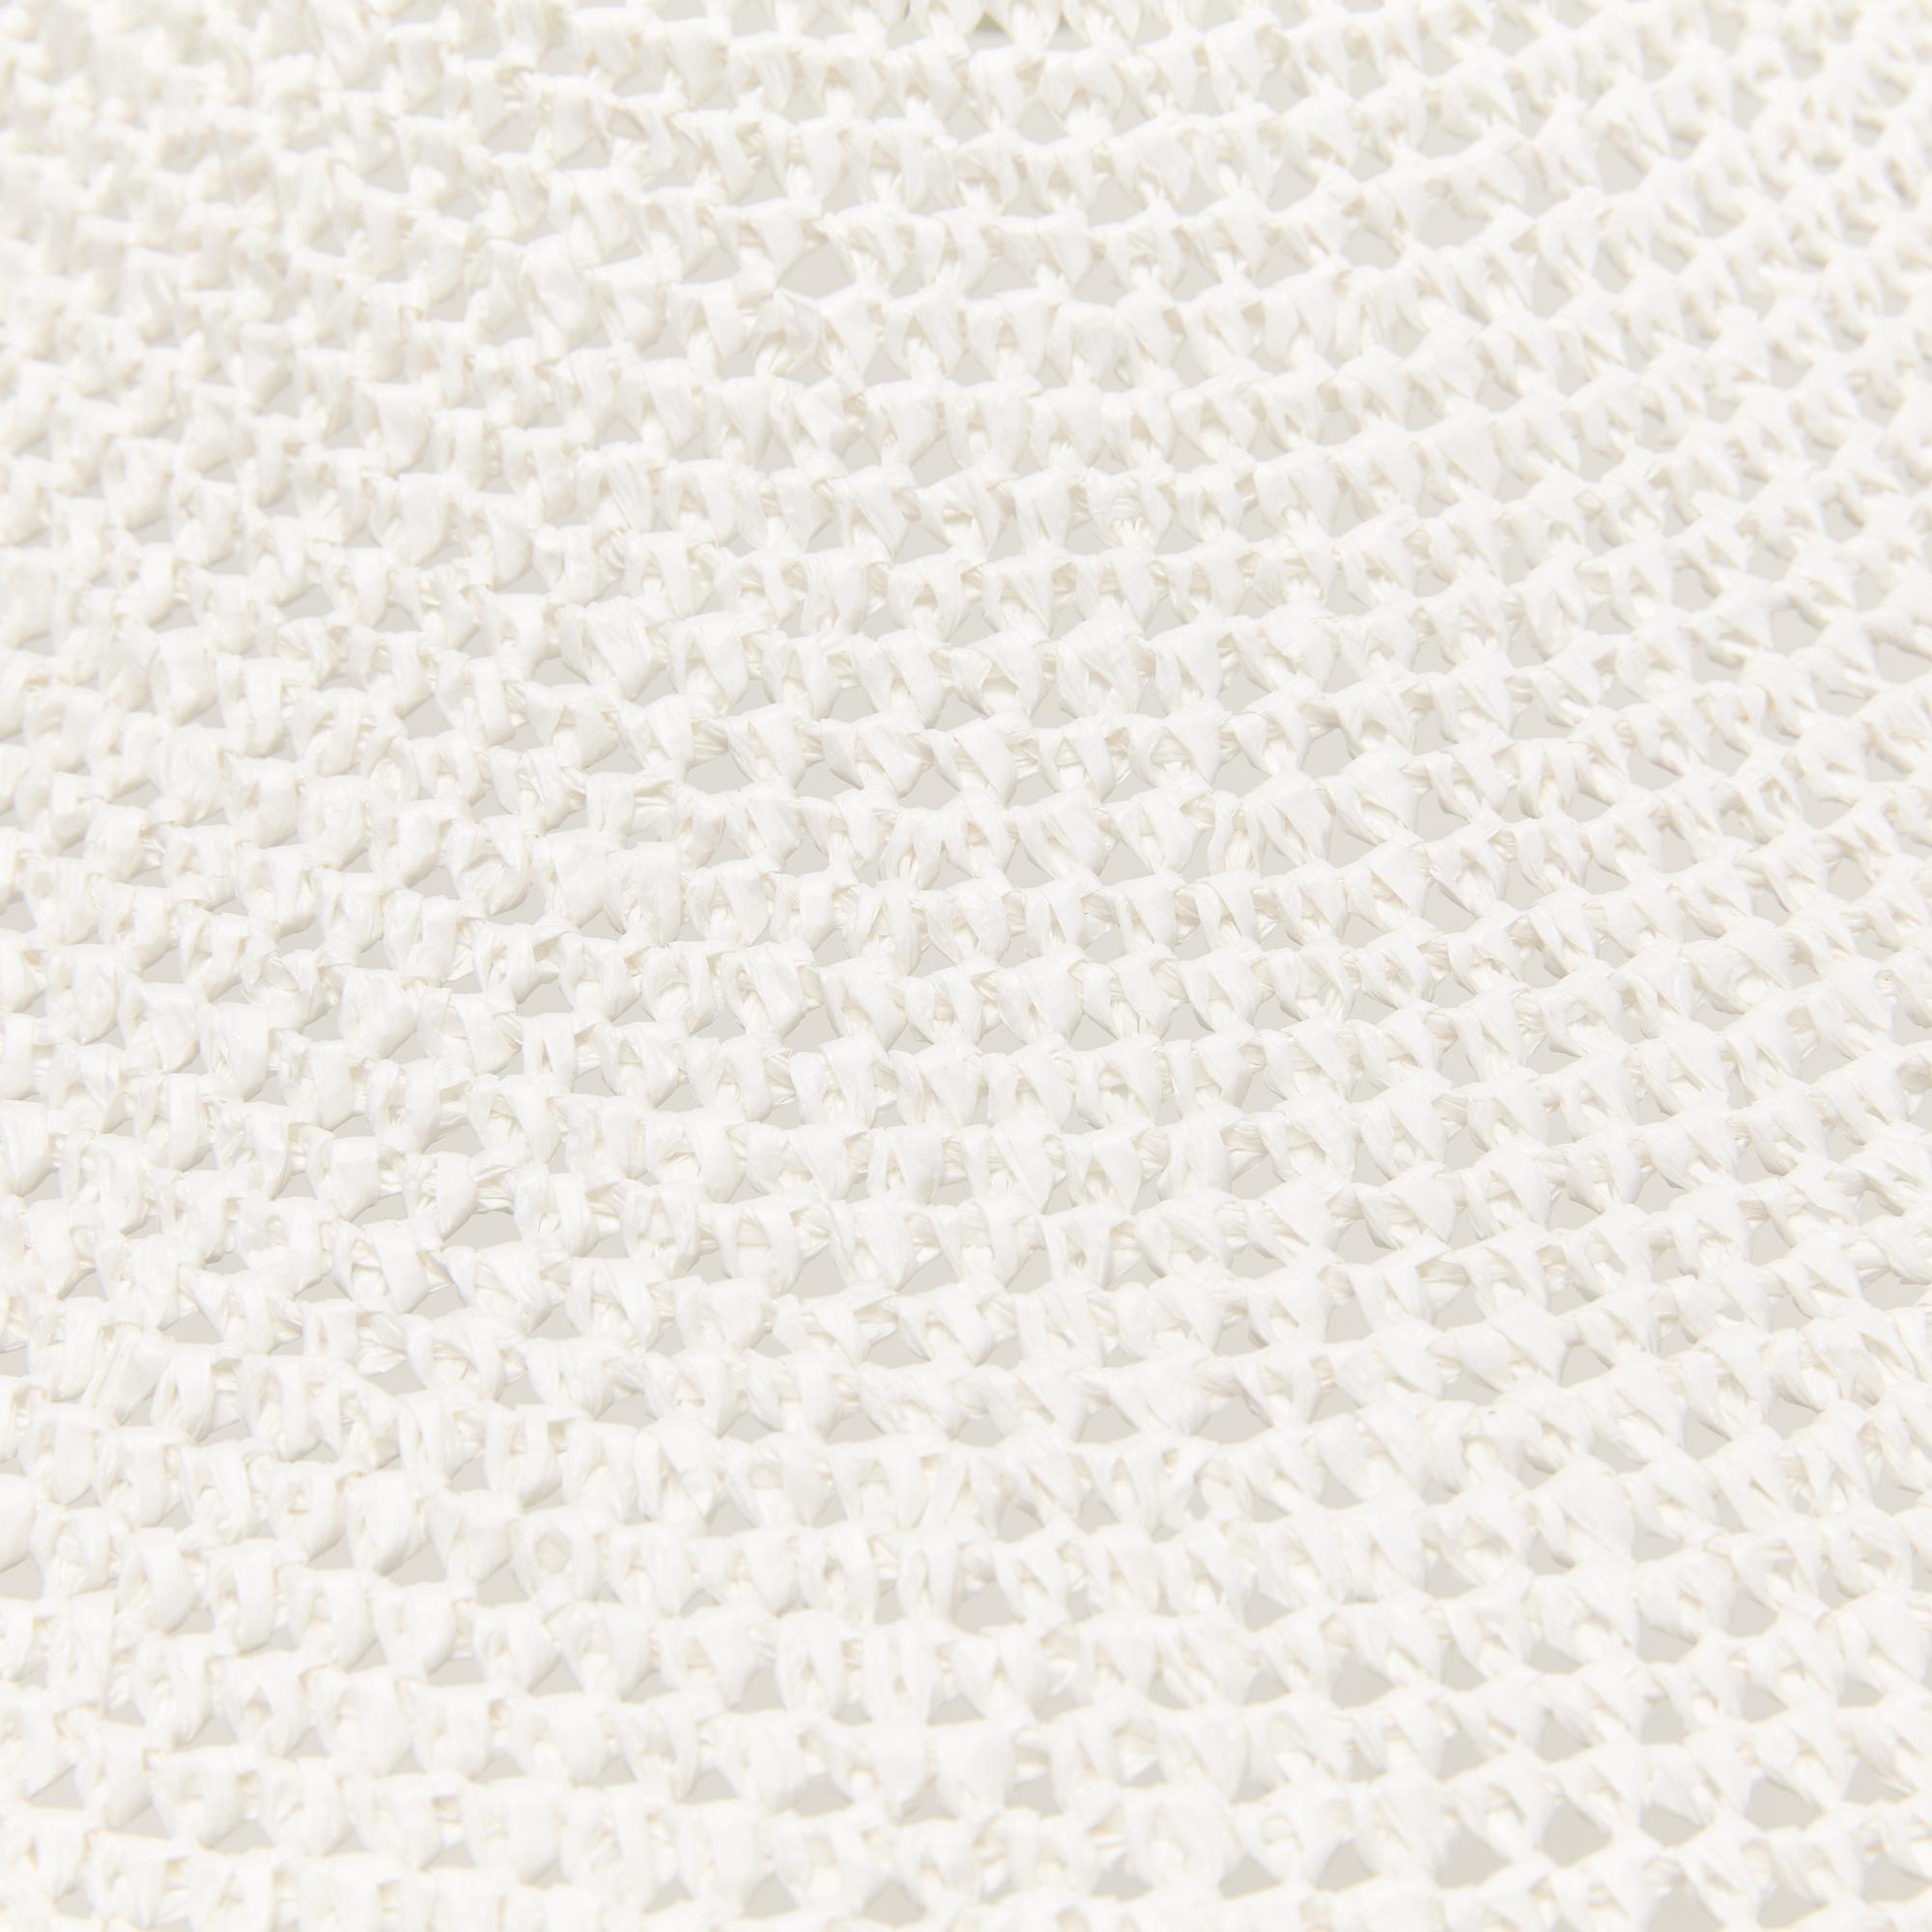 JUPE Pendant Light Ø100cm/39.4in, Hand Crocheted in 100% Egyptian Cotton In New Condition For Sale In London, London